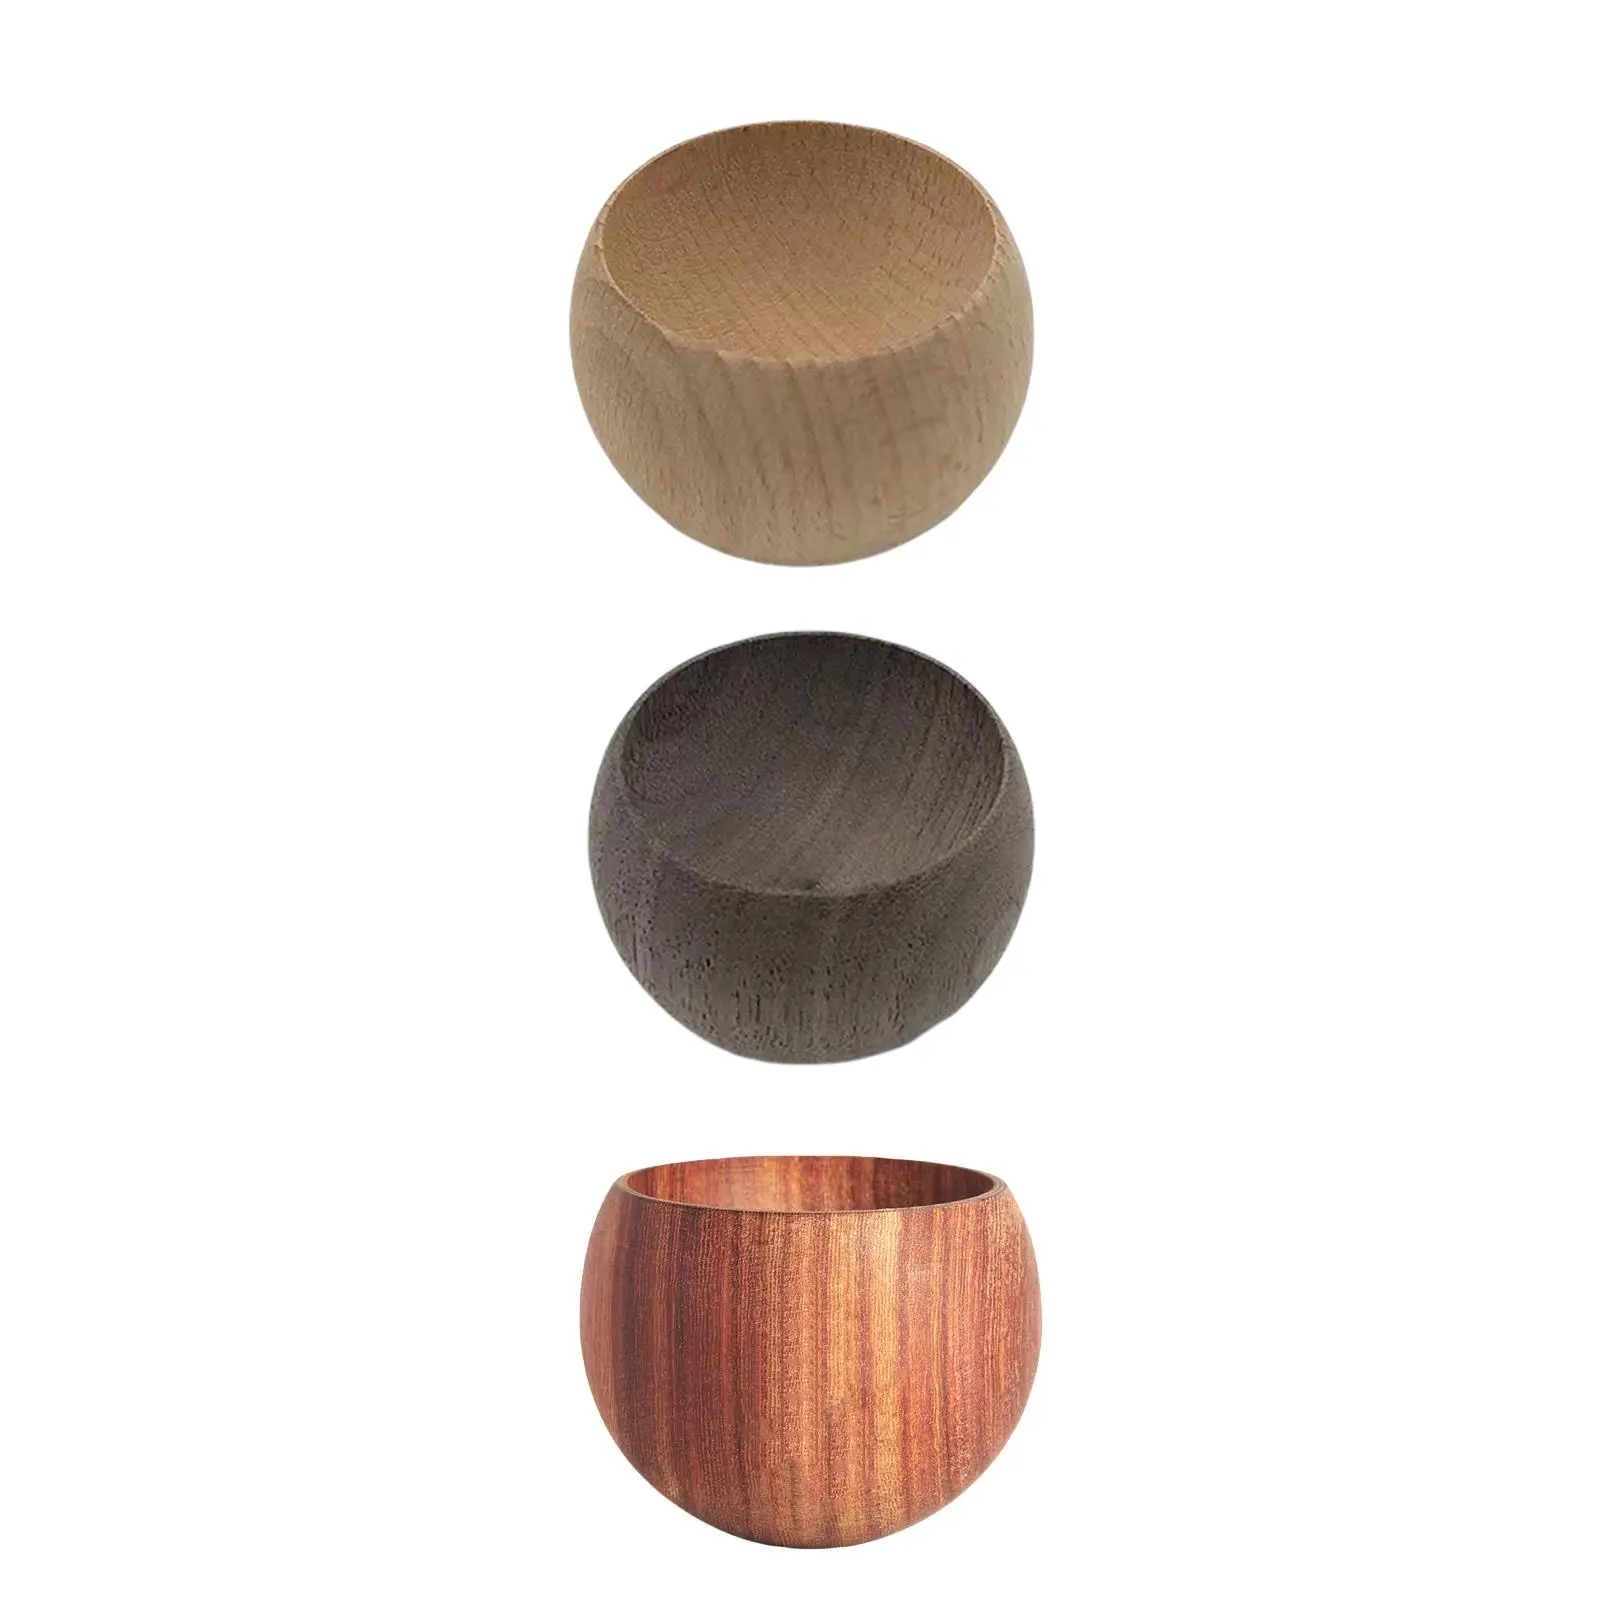 Wooden Car Diffuser Car Air Freshener Portable Gifts for Living Room Vehicle